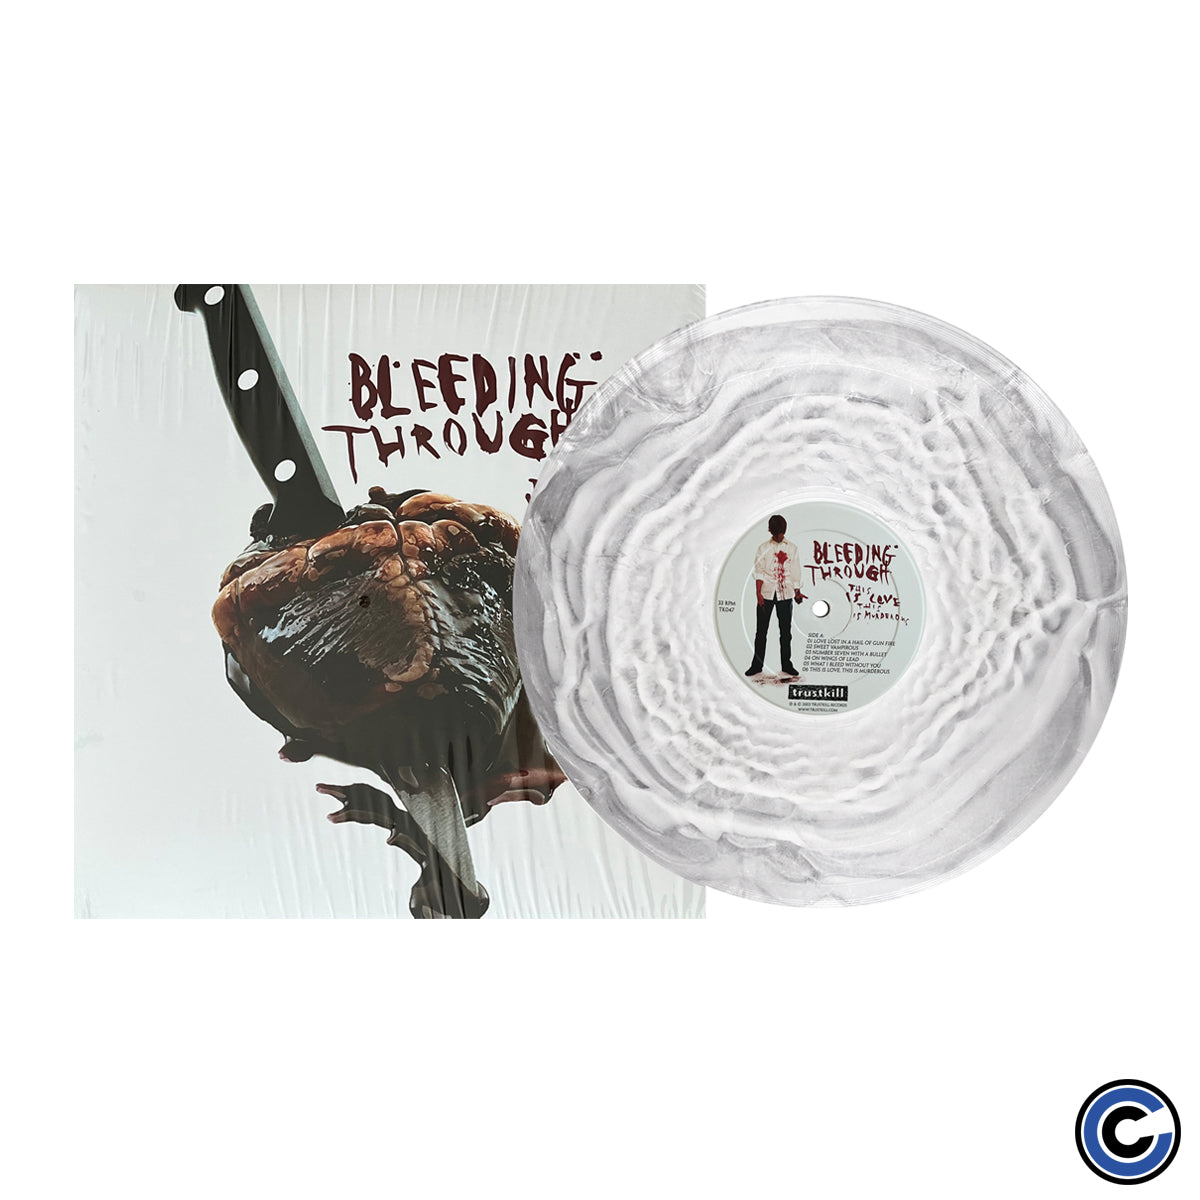 Bleeding Through "This Is Love, This Is Murderous" 12" Limited Edition Vinyl